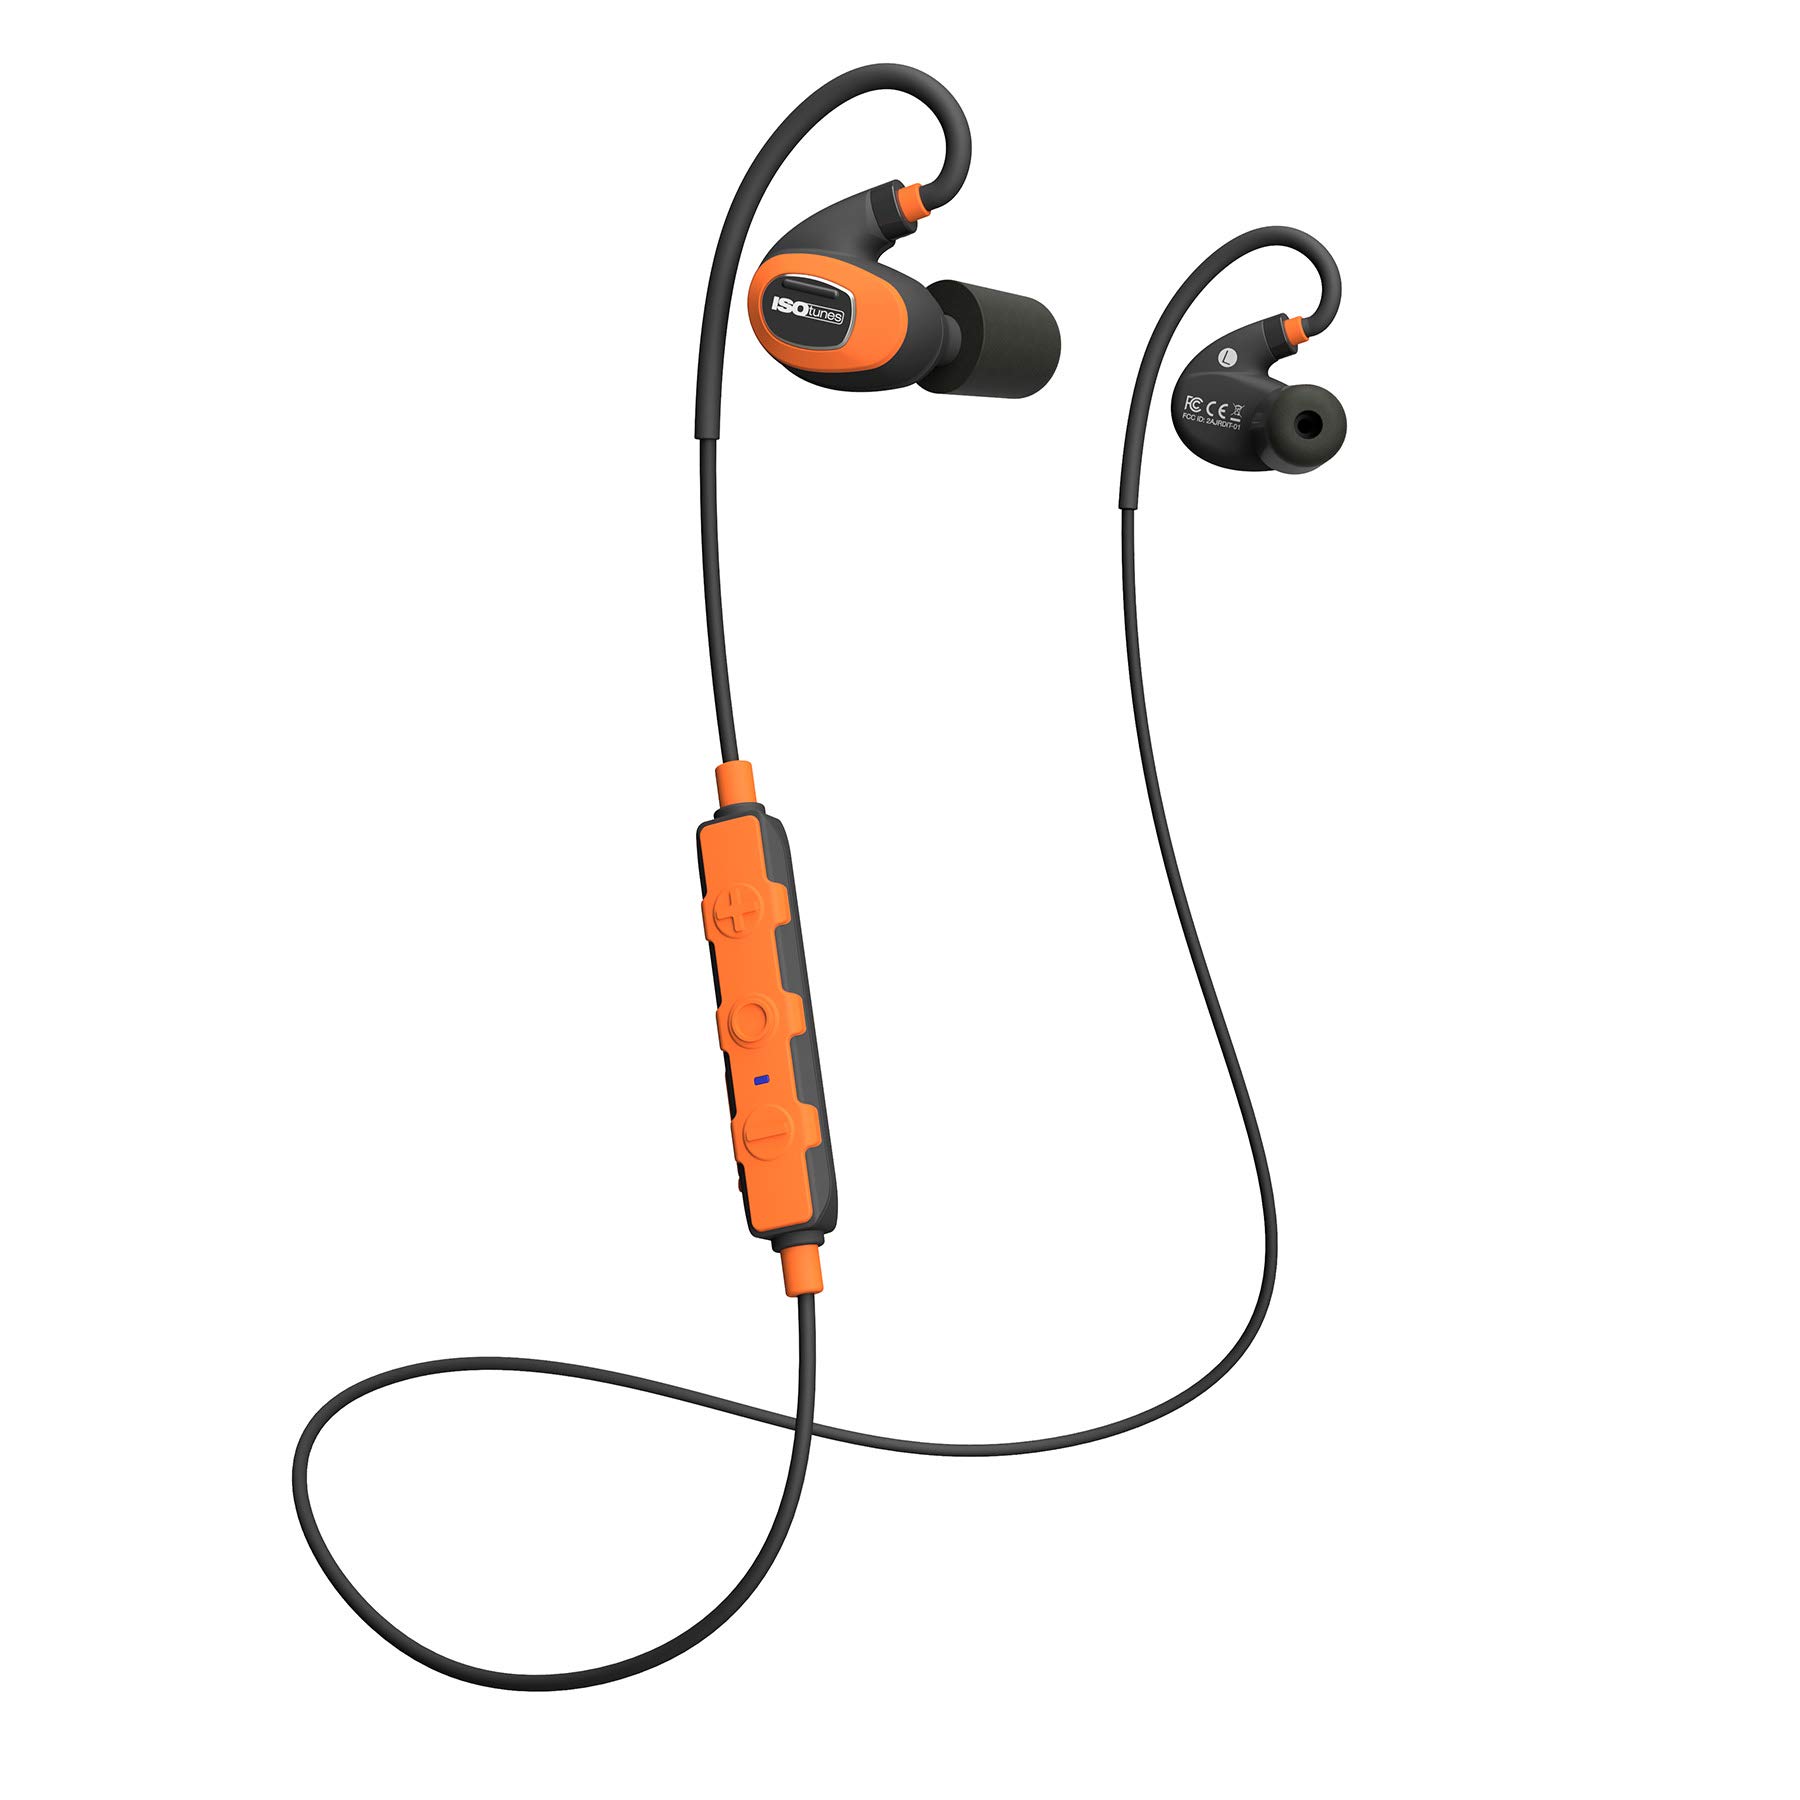 ISOtunes PRO 2.0 Bluetooth Earplug Headphones, 27 dB Noise Reduction Rating, 16+ Hour Battery, IP67 Durability, Noise Cancelling Mic, OSHA Compliant Professional Hearing Protector (Safety Orange)